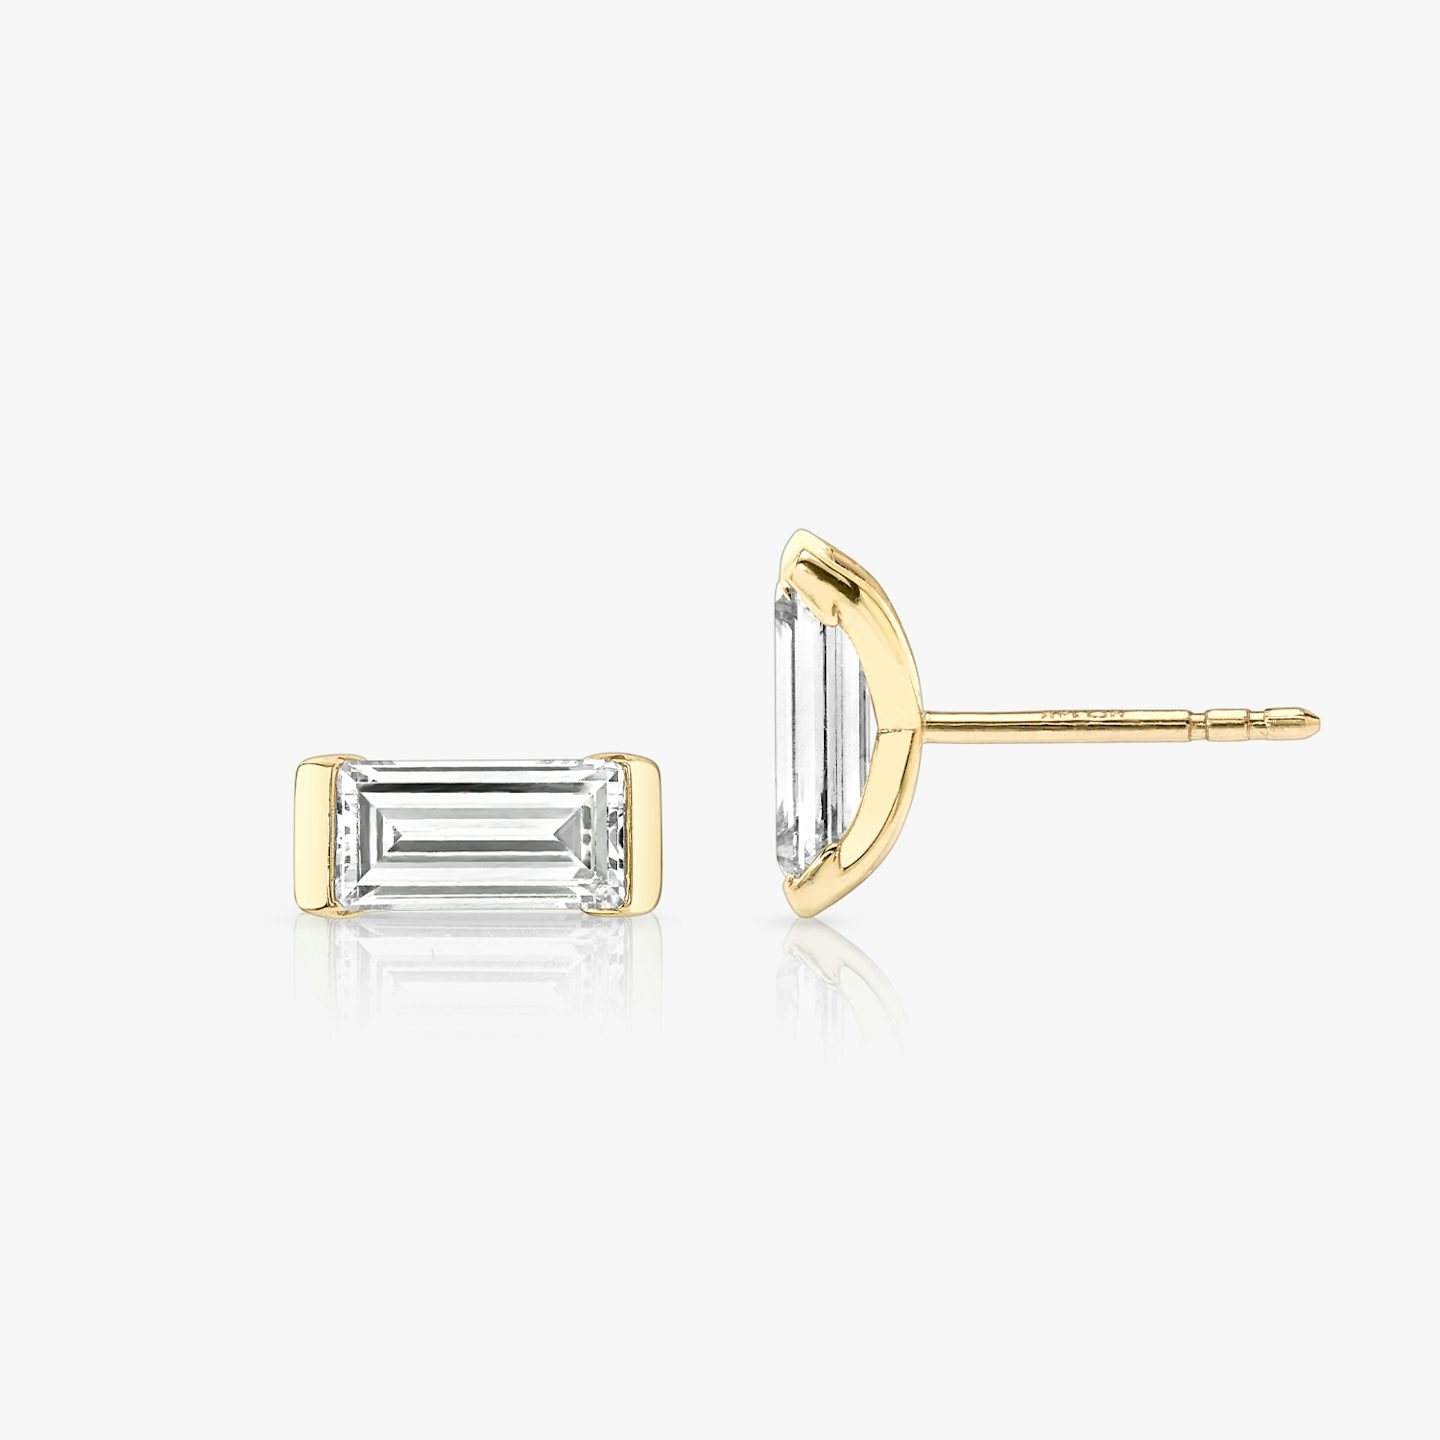 undefined | baguette | 14k | yellow-gold | caratWeight: 0.75ct